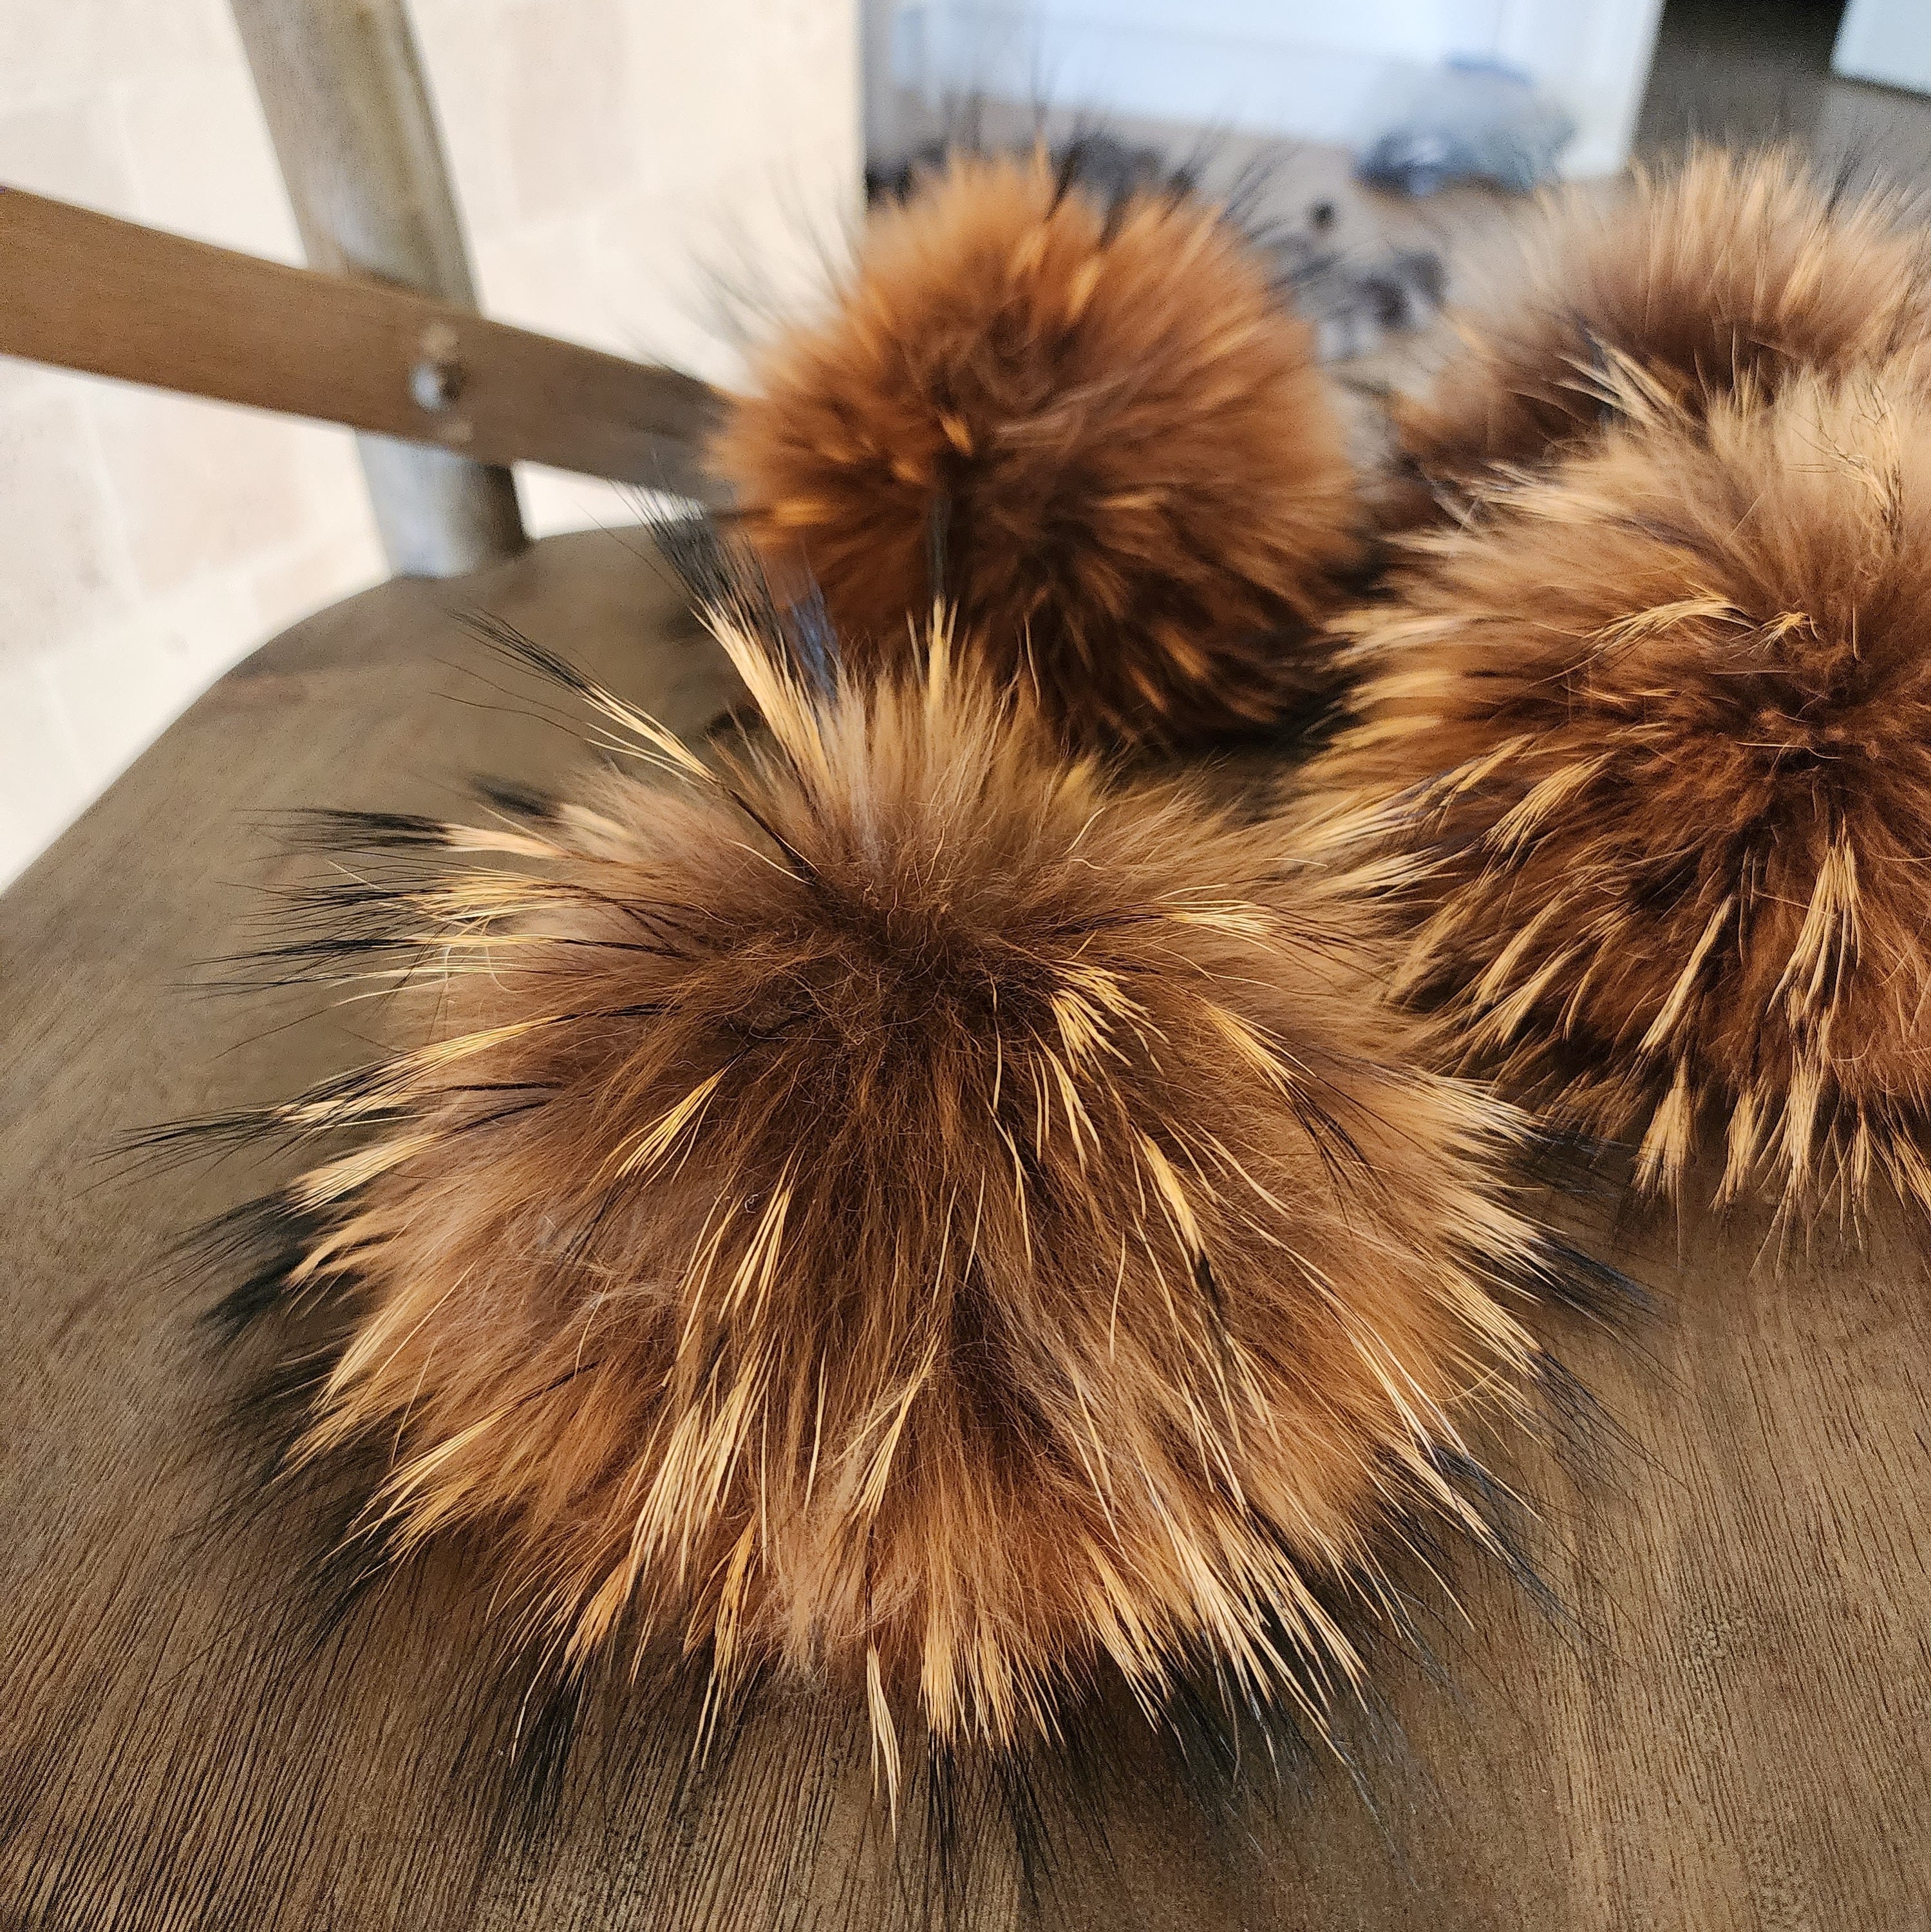 XL Sand Color Real Fur Pompoms for beanie hats keychains. Snap pom pom 7”